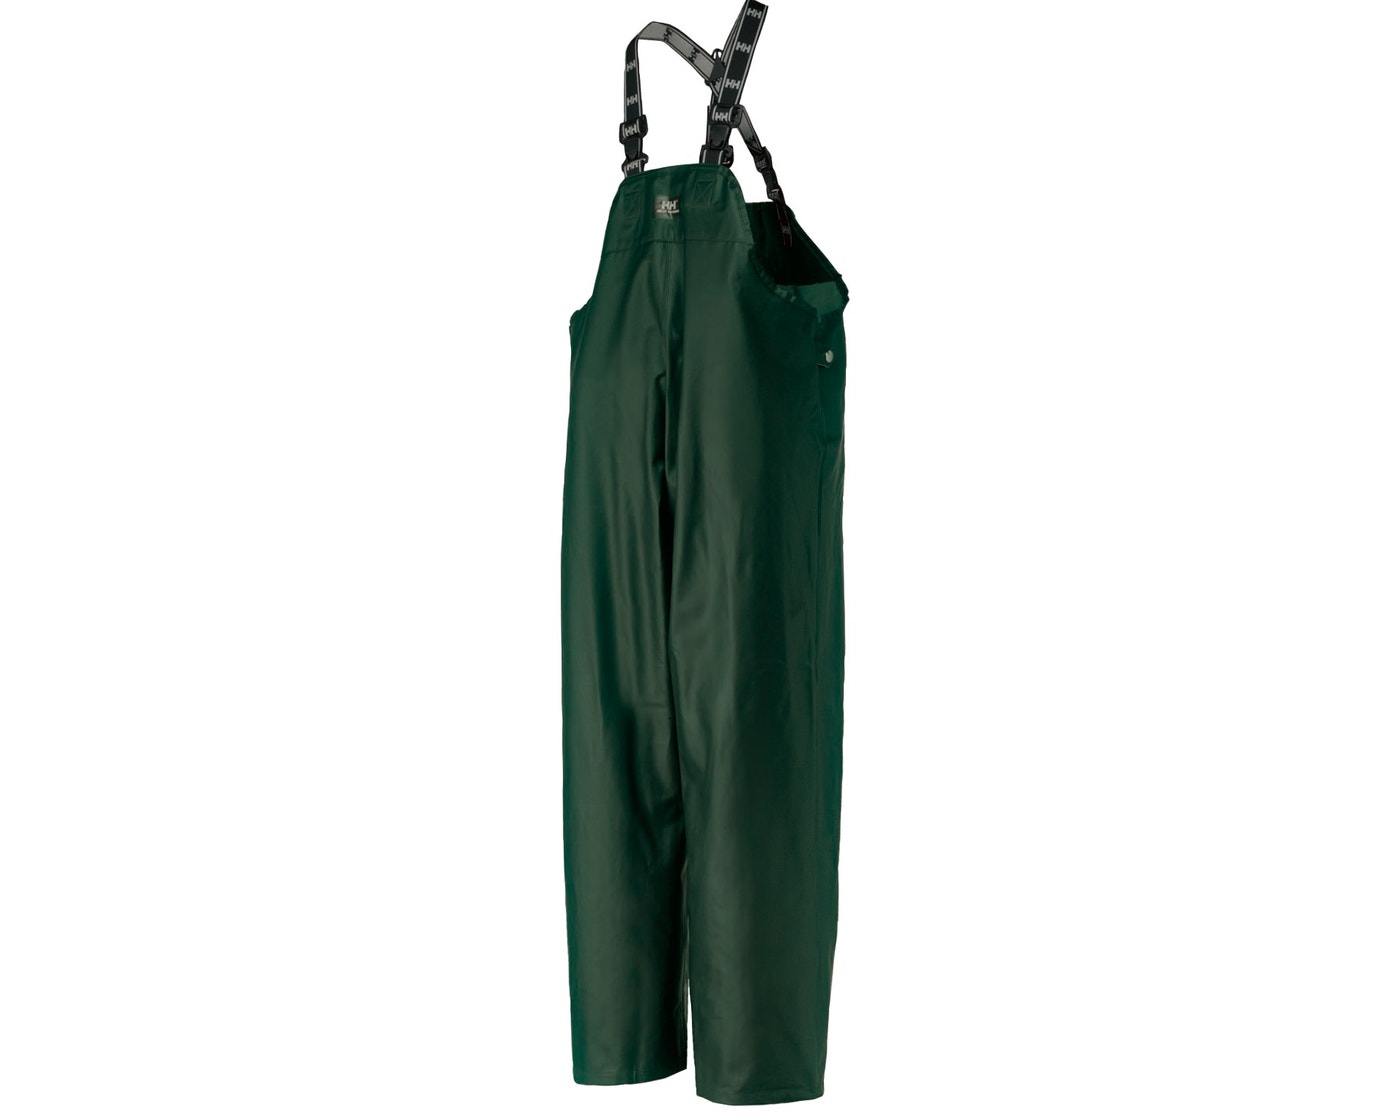 Helly Hansen Men's Rain Bib Work Pants 70500 Highliner PVC on Cotton Cold Resistant Waterproof Reversible with Roomy Fit Green Sizes S-4XL